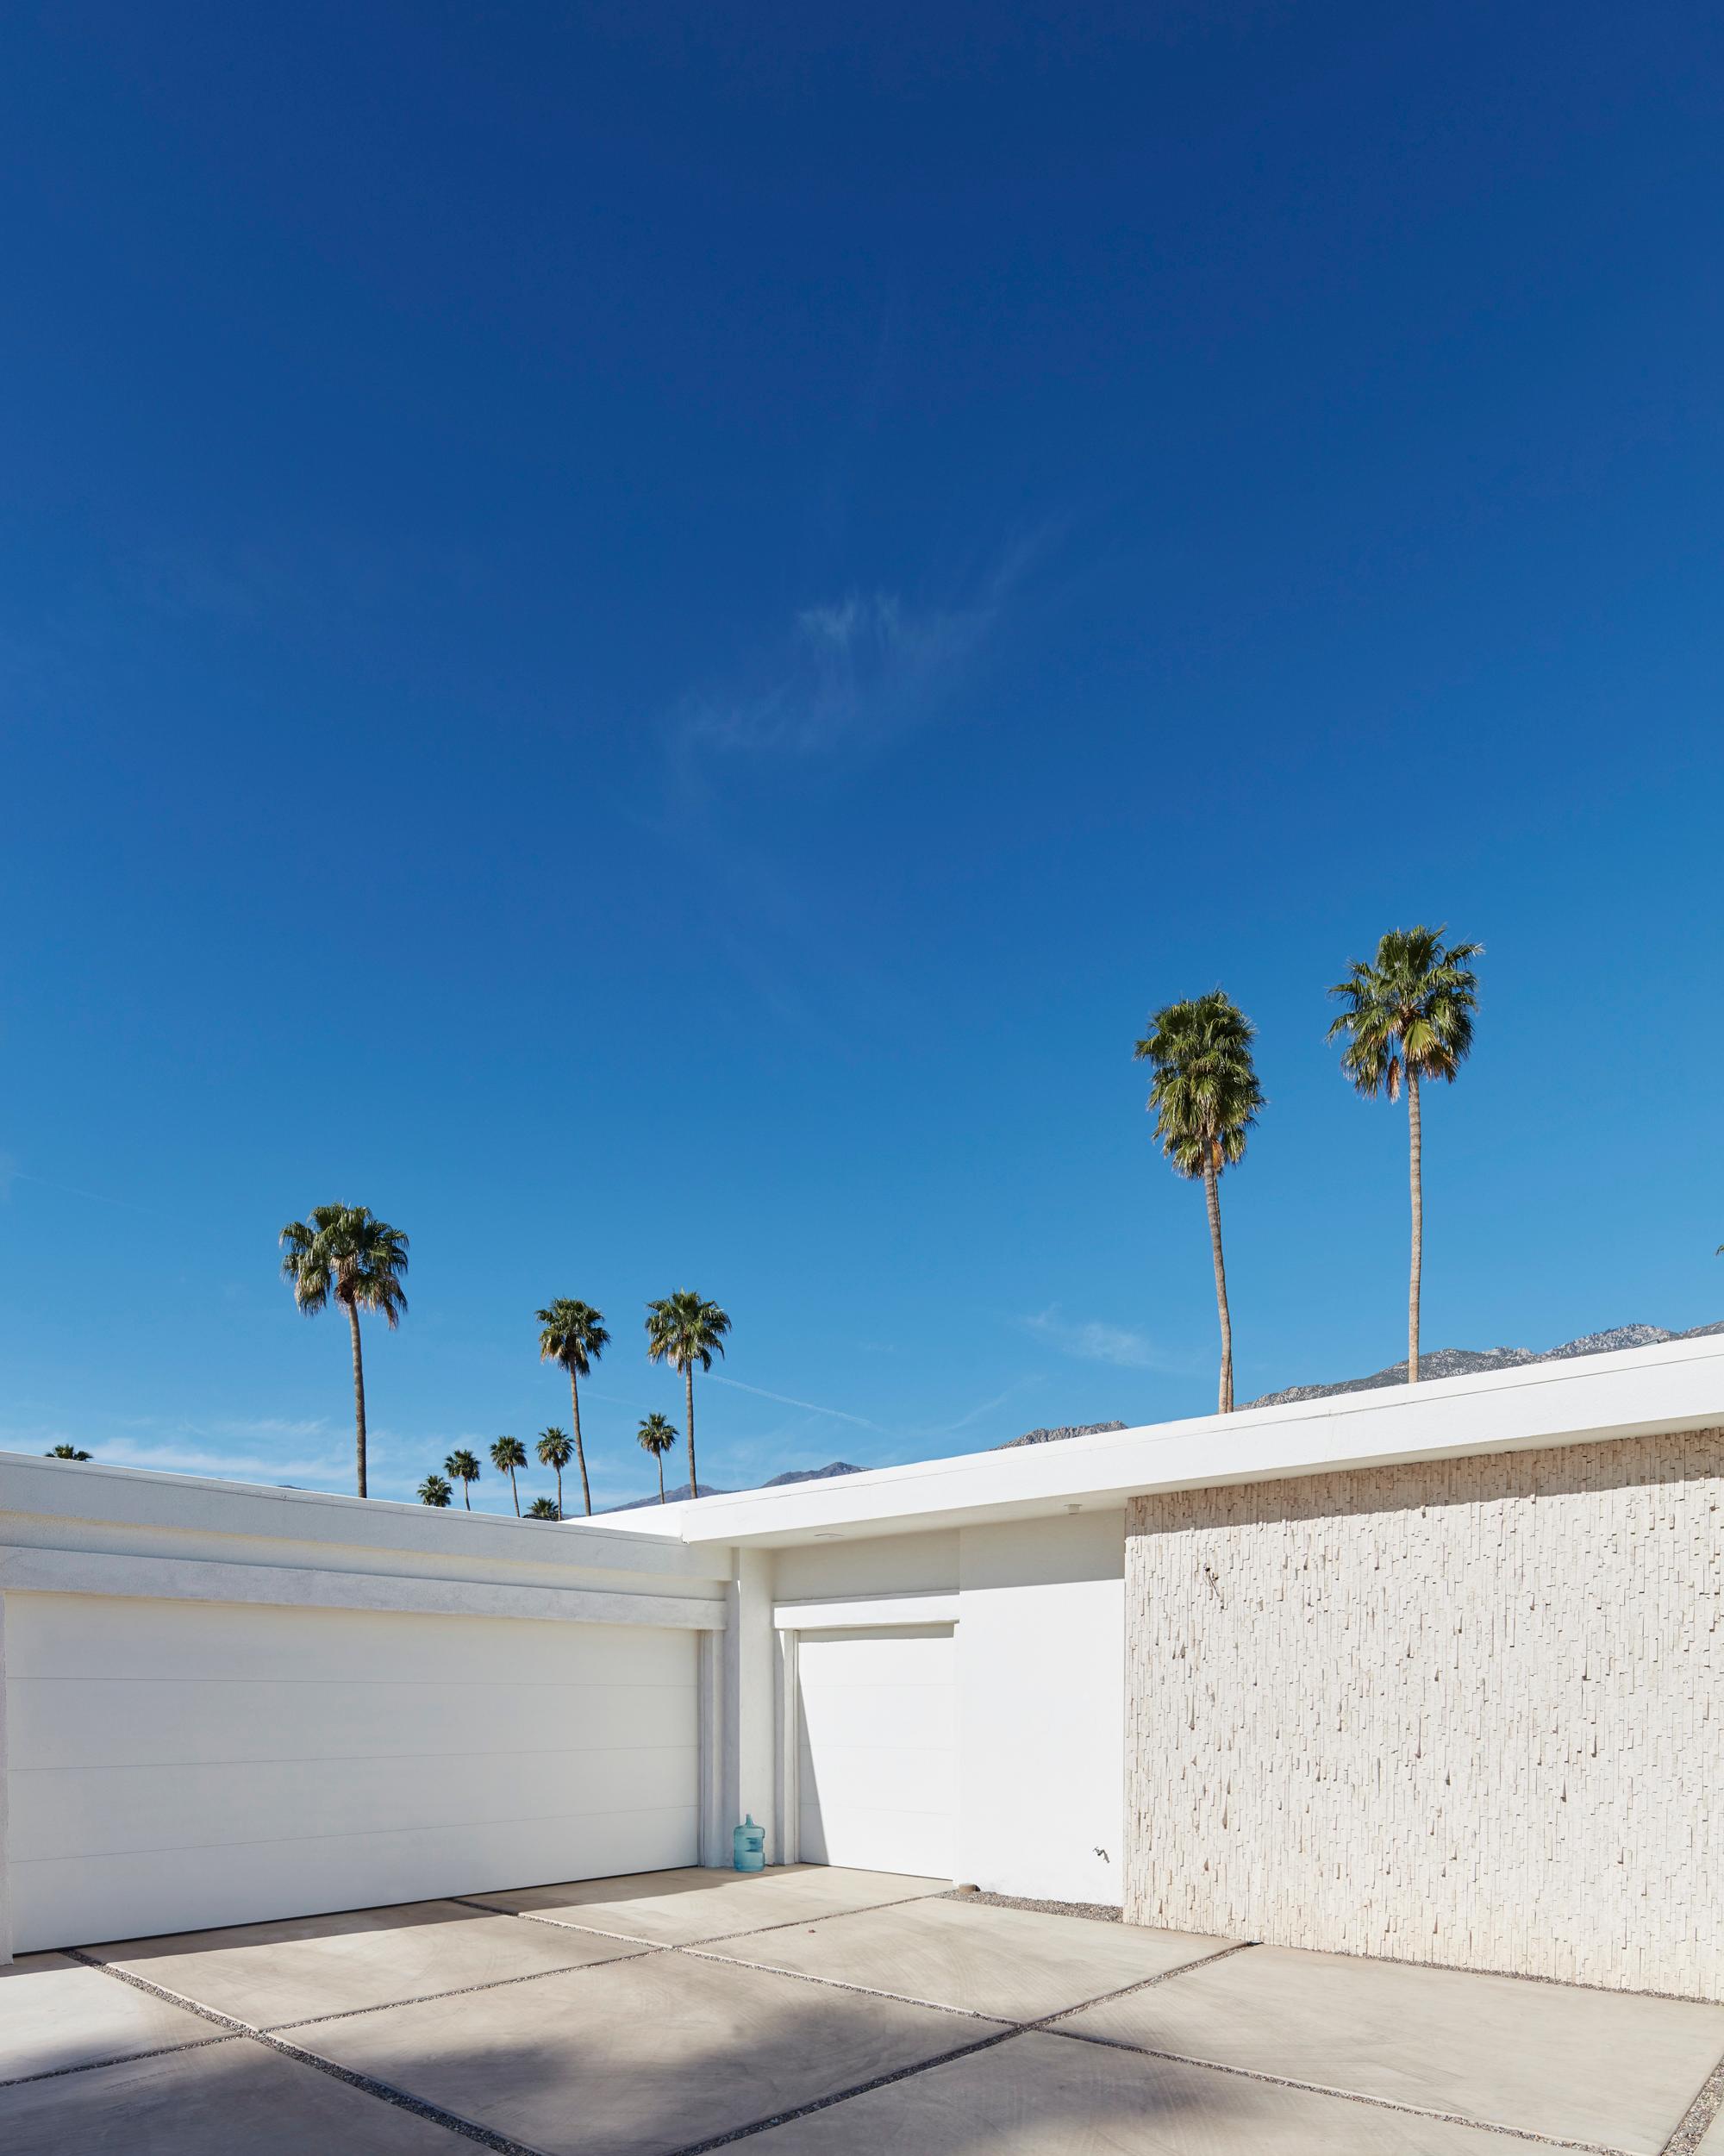 Palm Springs ( Water ) - a study of iconic mid century desert architecture